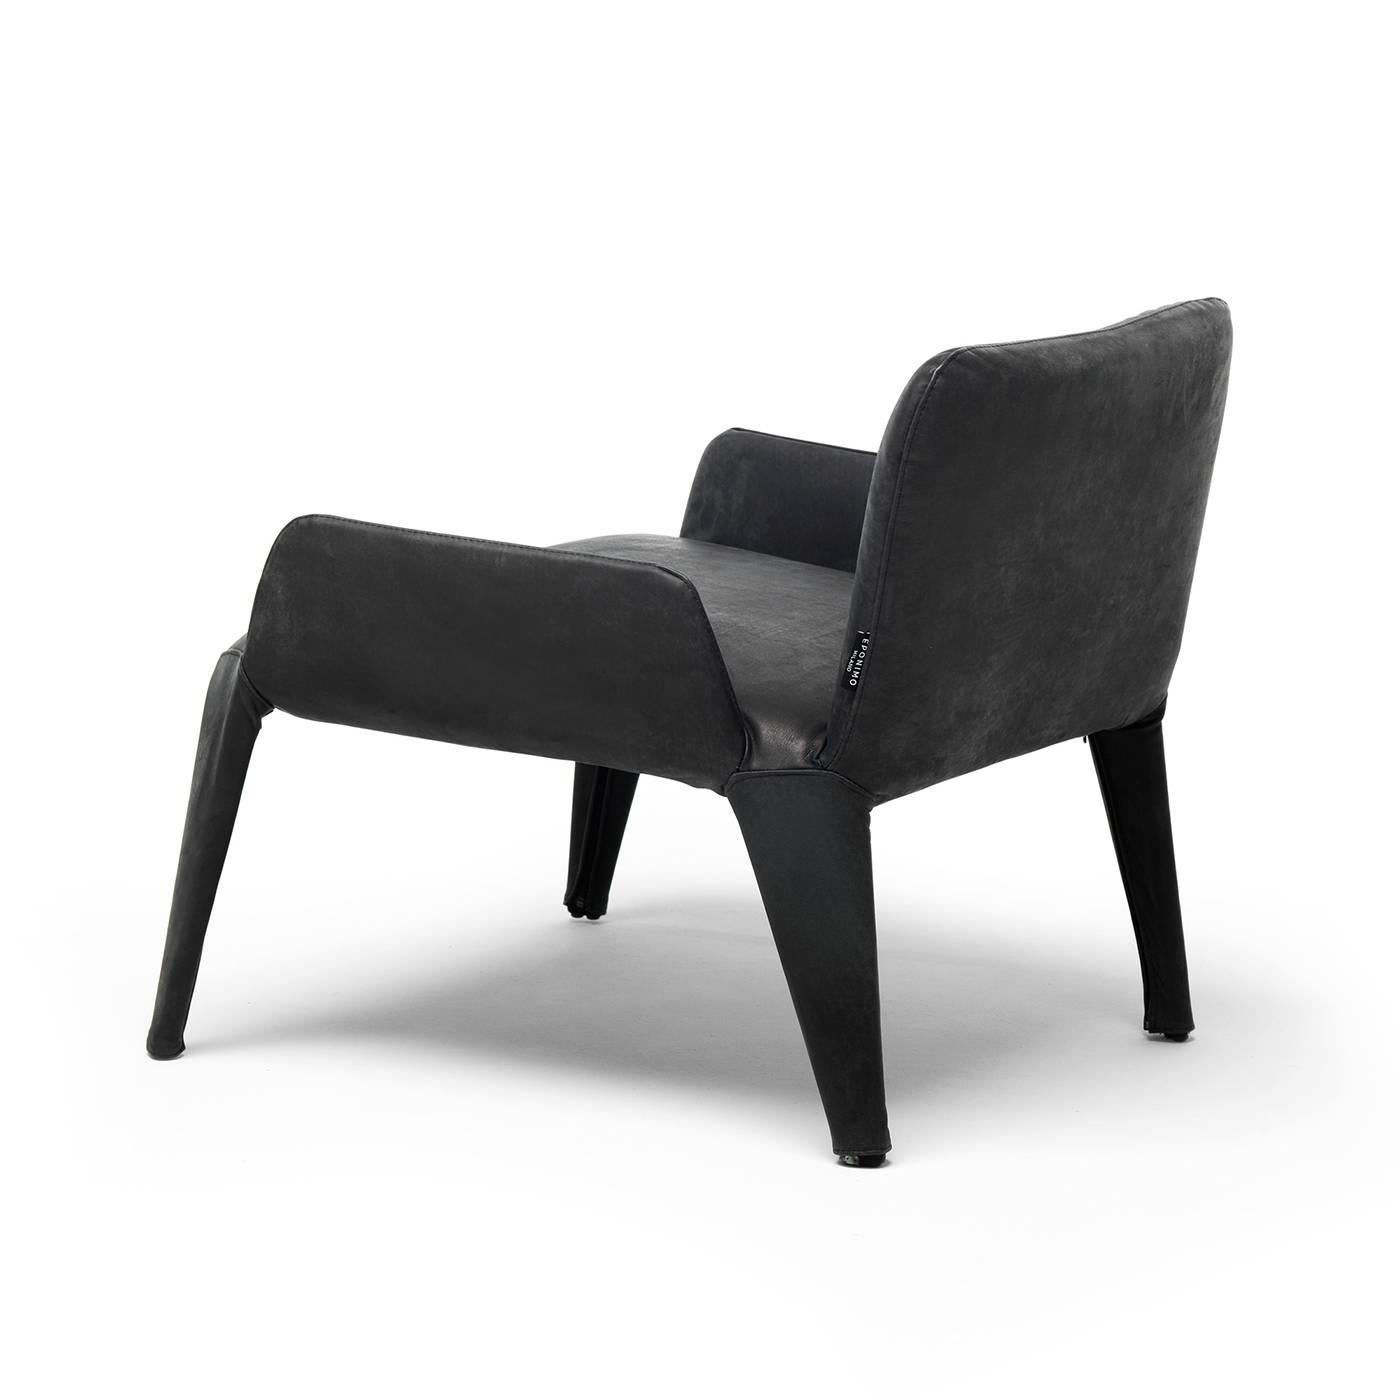 Part of the Nova collection, this striking armchair will add a bold accent to a contemporary living room and can be combined with the other chairs and the Nova two-seat sofa for a complete look, suitable also for small rooms. The sophisticated and